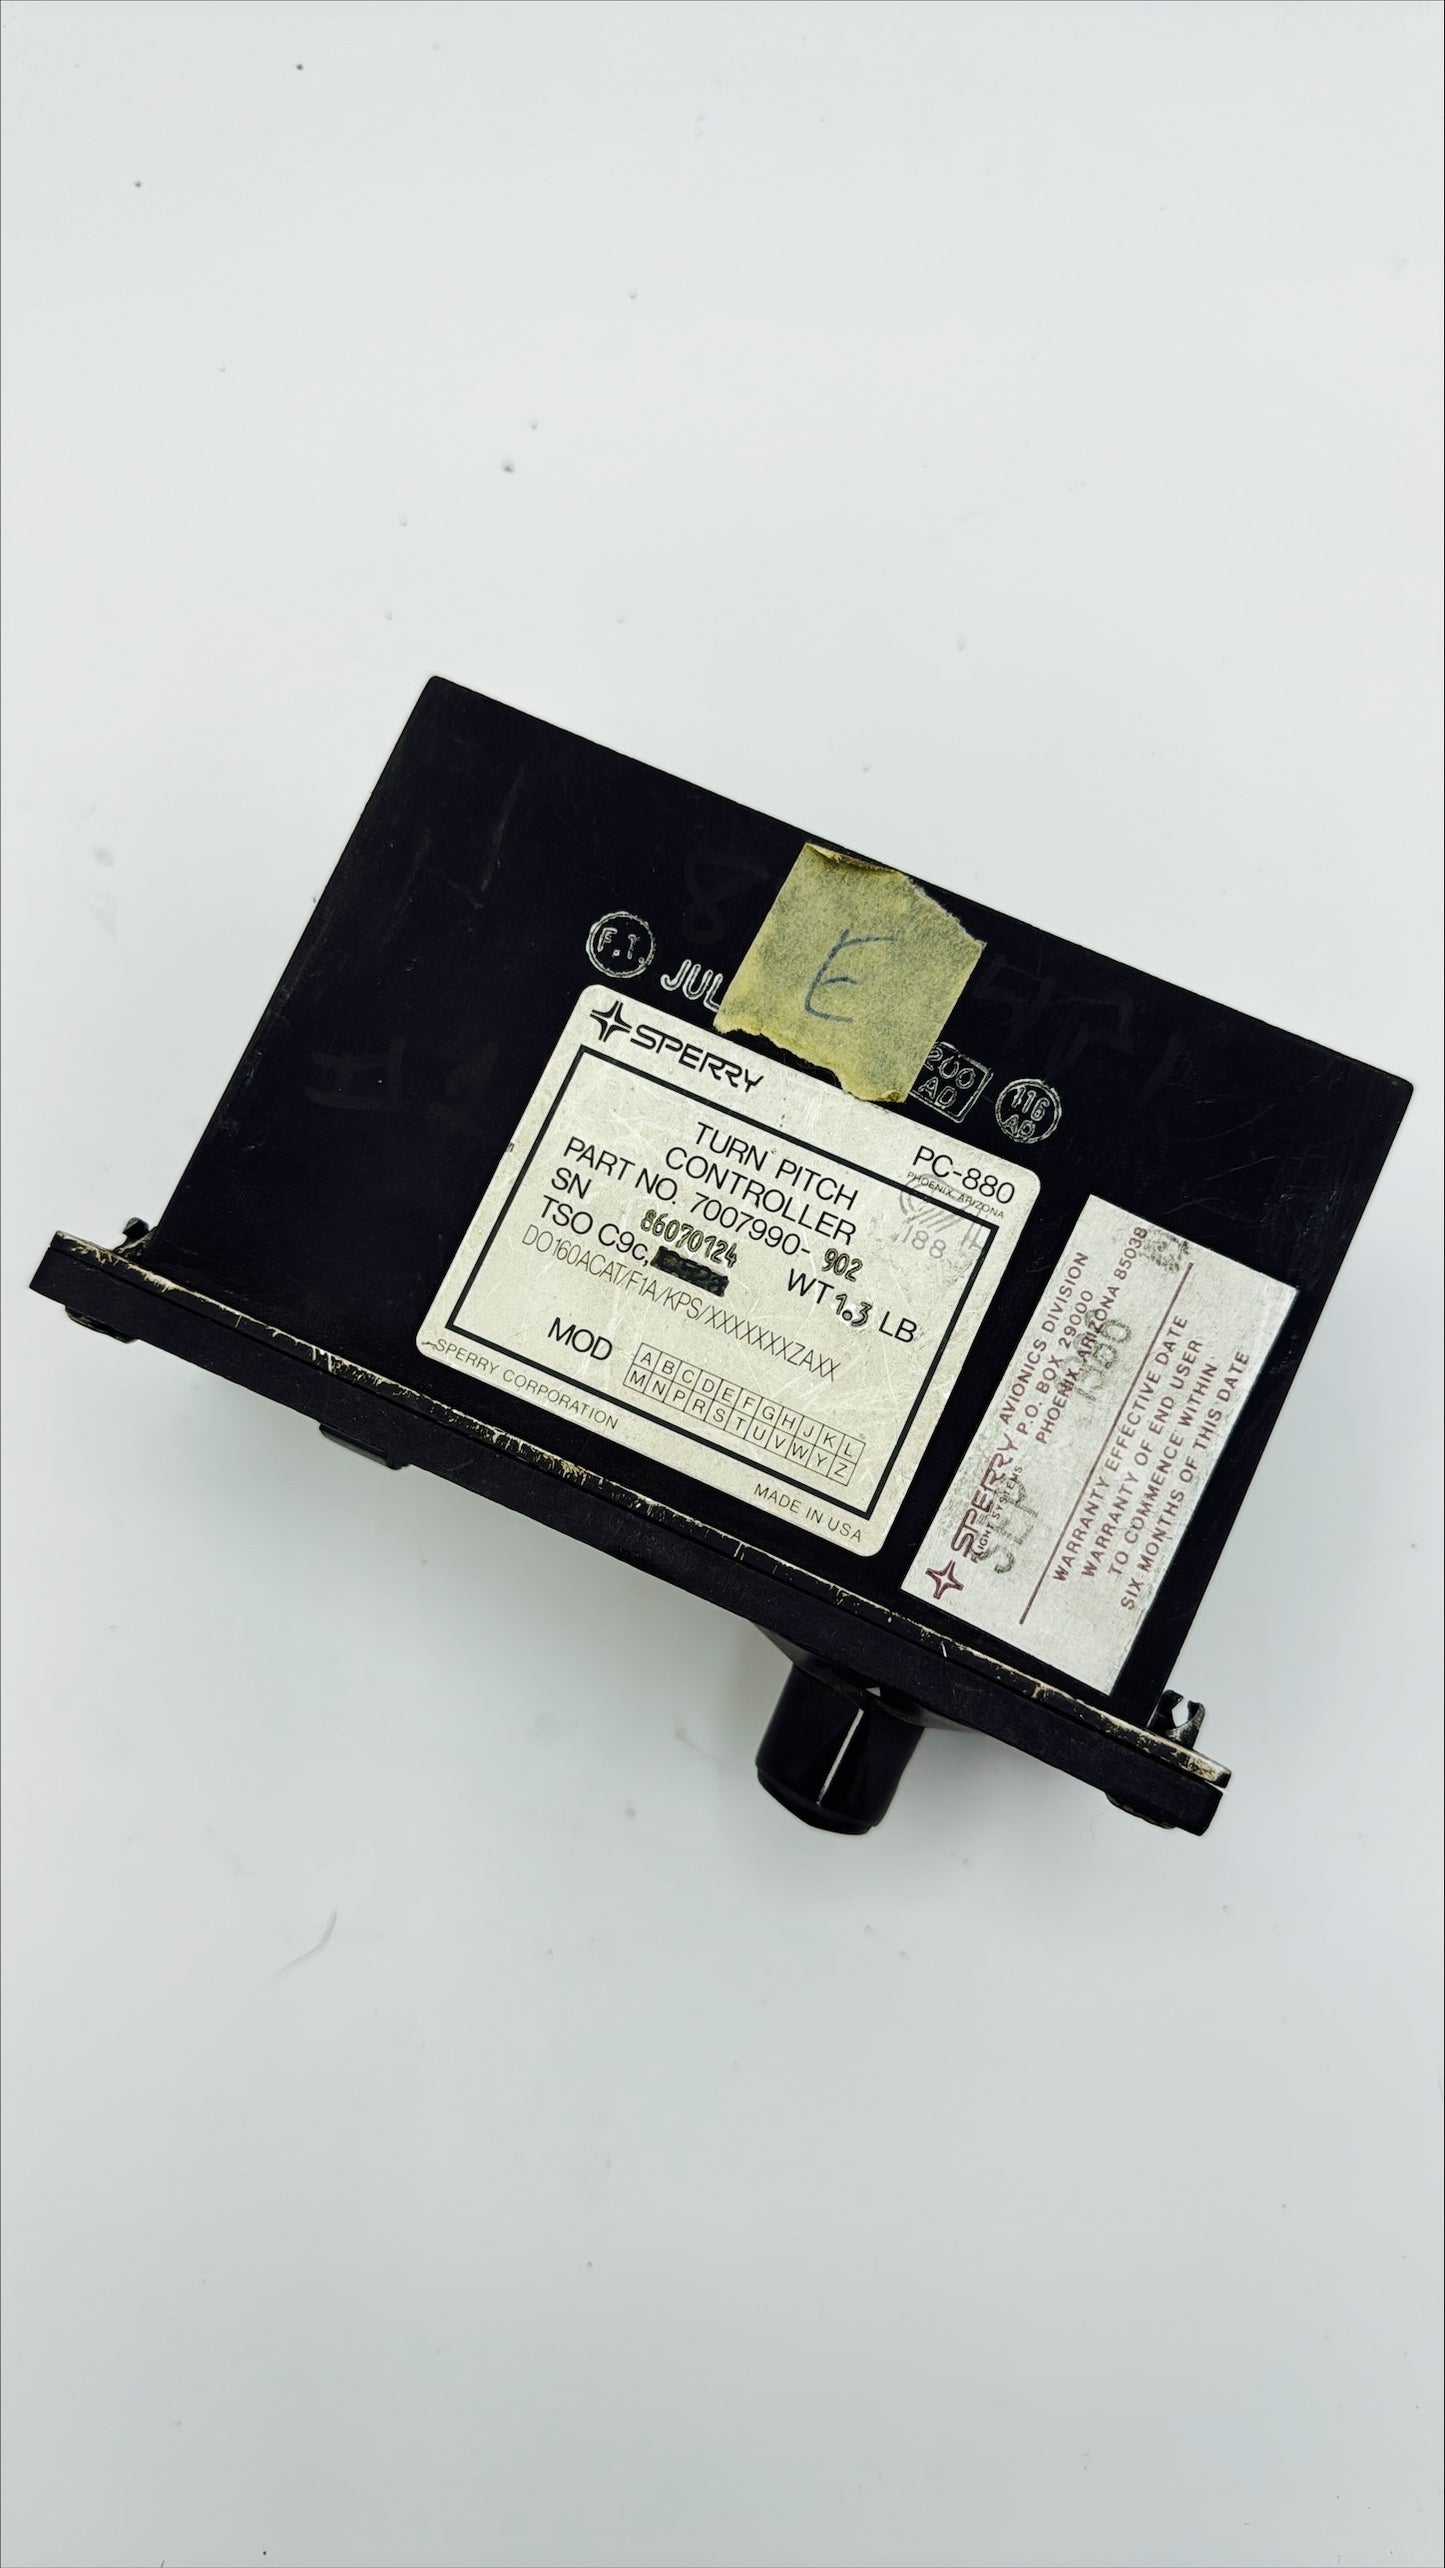 7007990-902 TURN PITCH CONTROLLER COND: SV